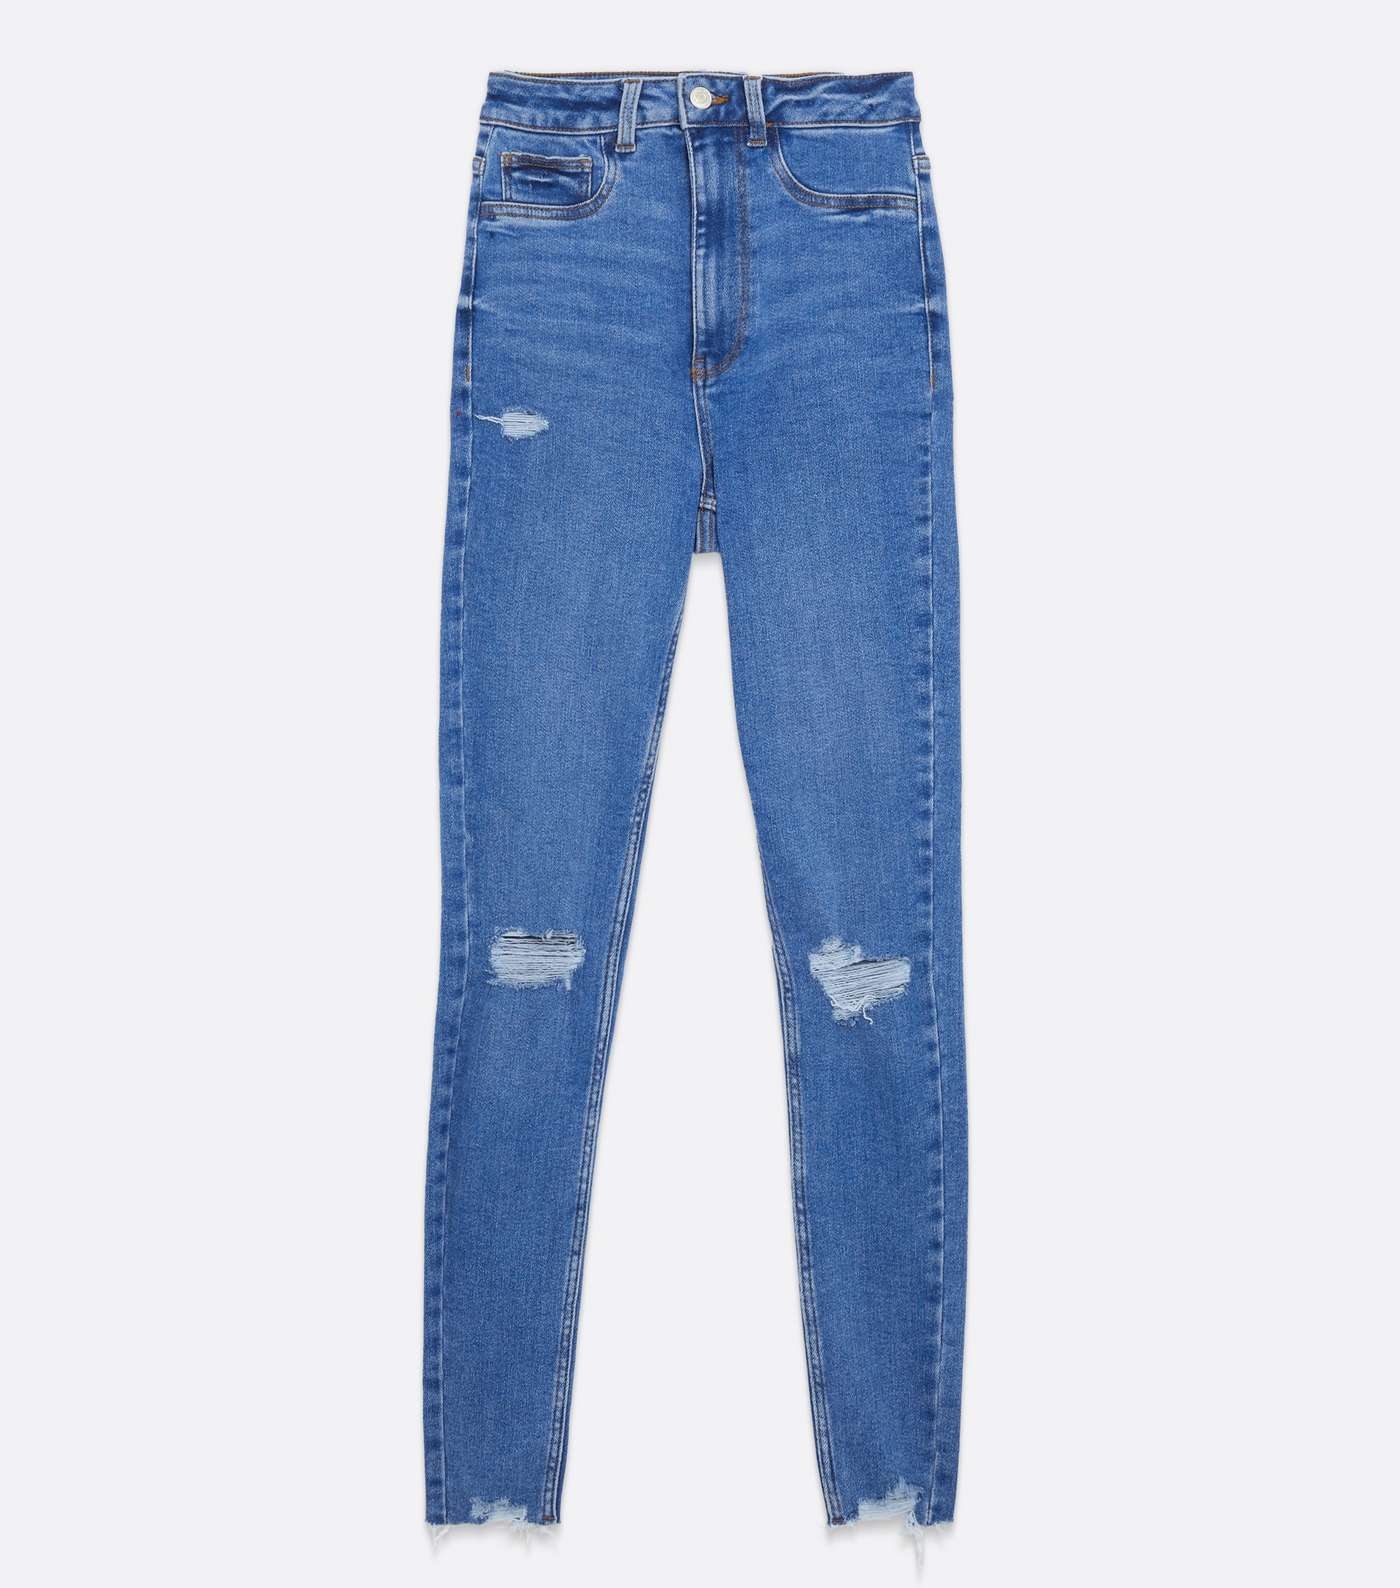 Tall Bright Blue Ripped High Waist Hallie Super Skinny Jeans Image 5